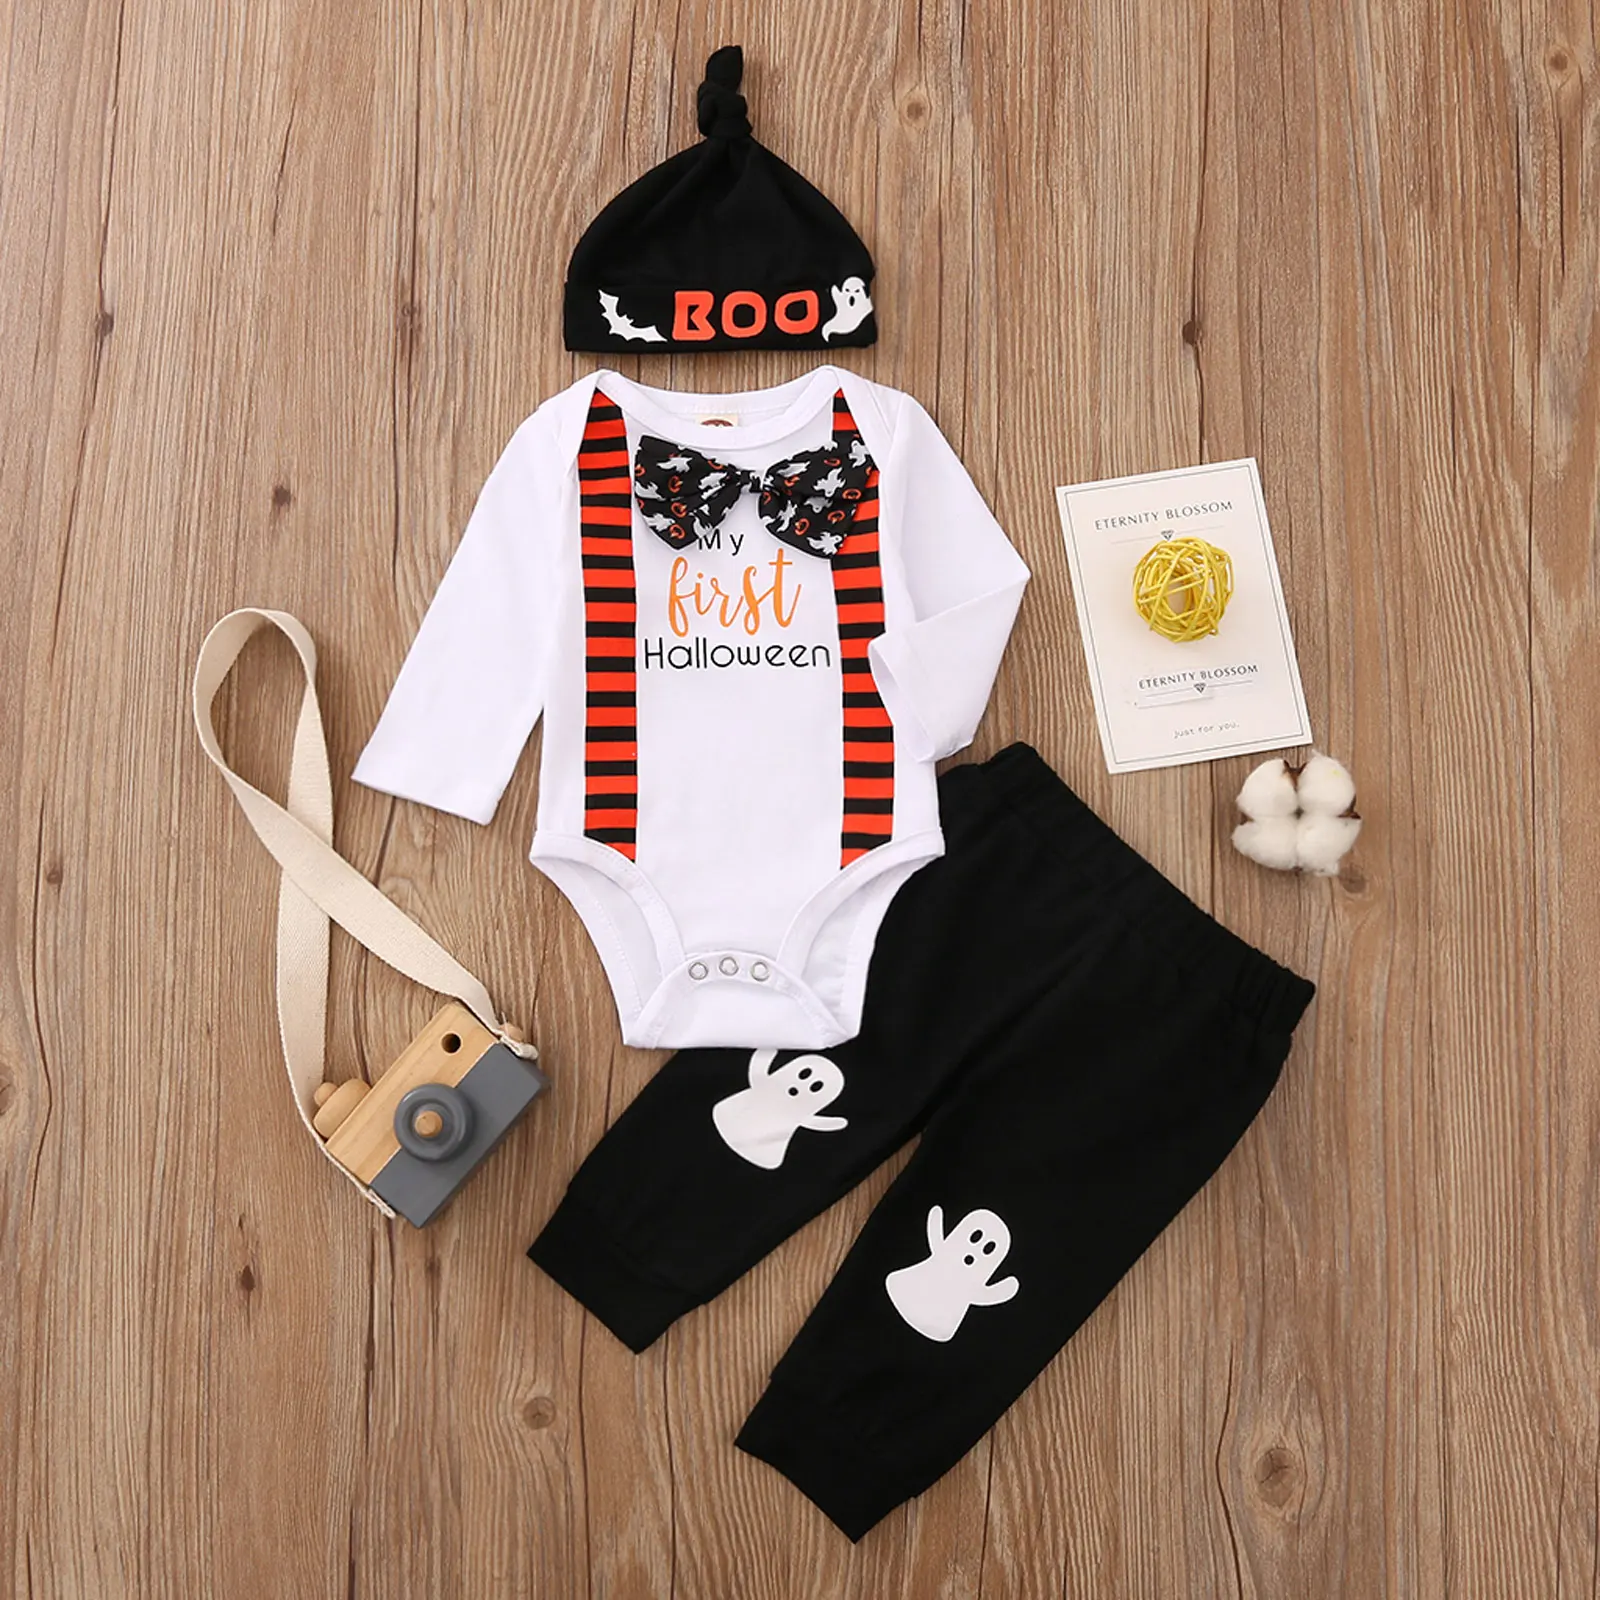 

3Pcs Baby Halloween Outfit Baby Boy Clothes Letters Print Long Sleeves Romper + Ghost Print Pants + Hat for Toddler 0-18 Months